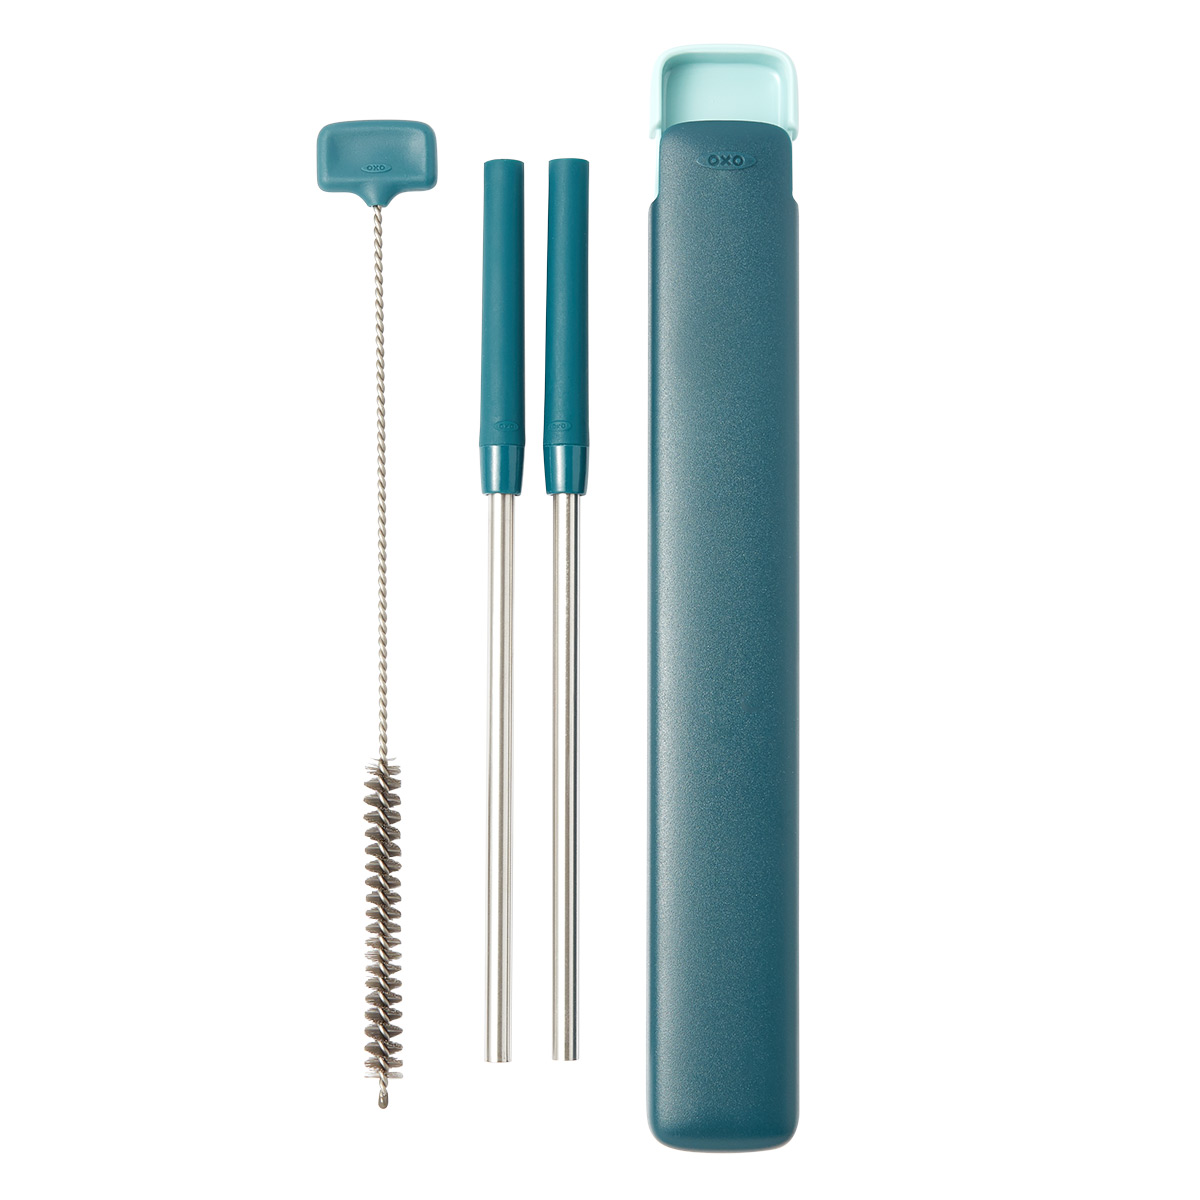 https://www.containerstore.com/catalogimages/388685/10081156-OXO-extendable-straw-set-wi.jpg